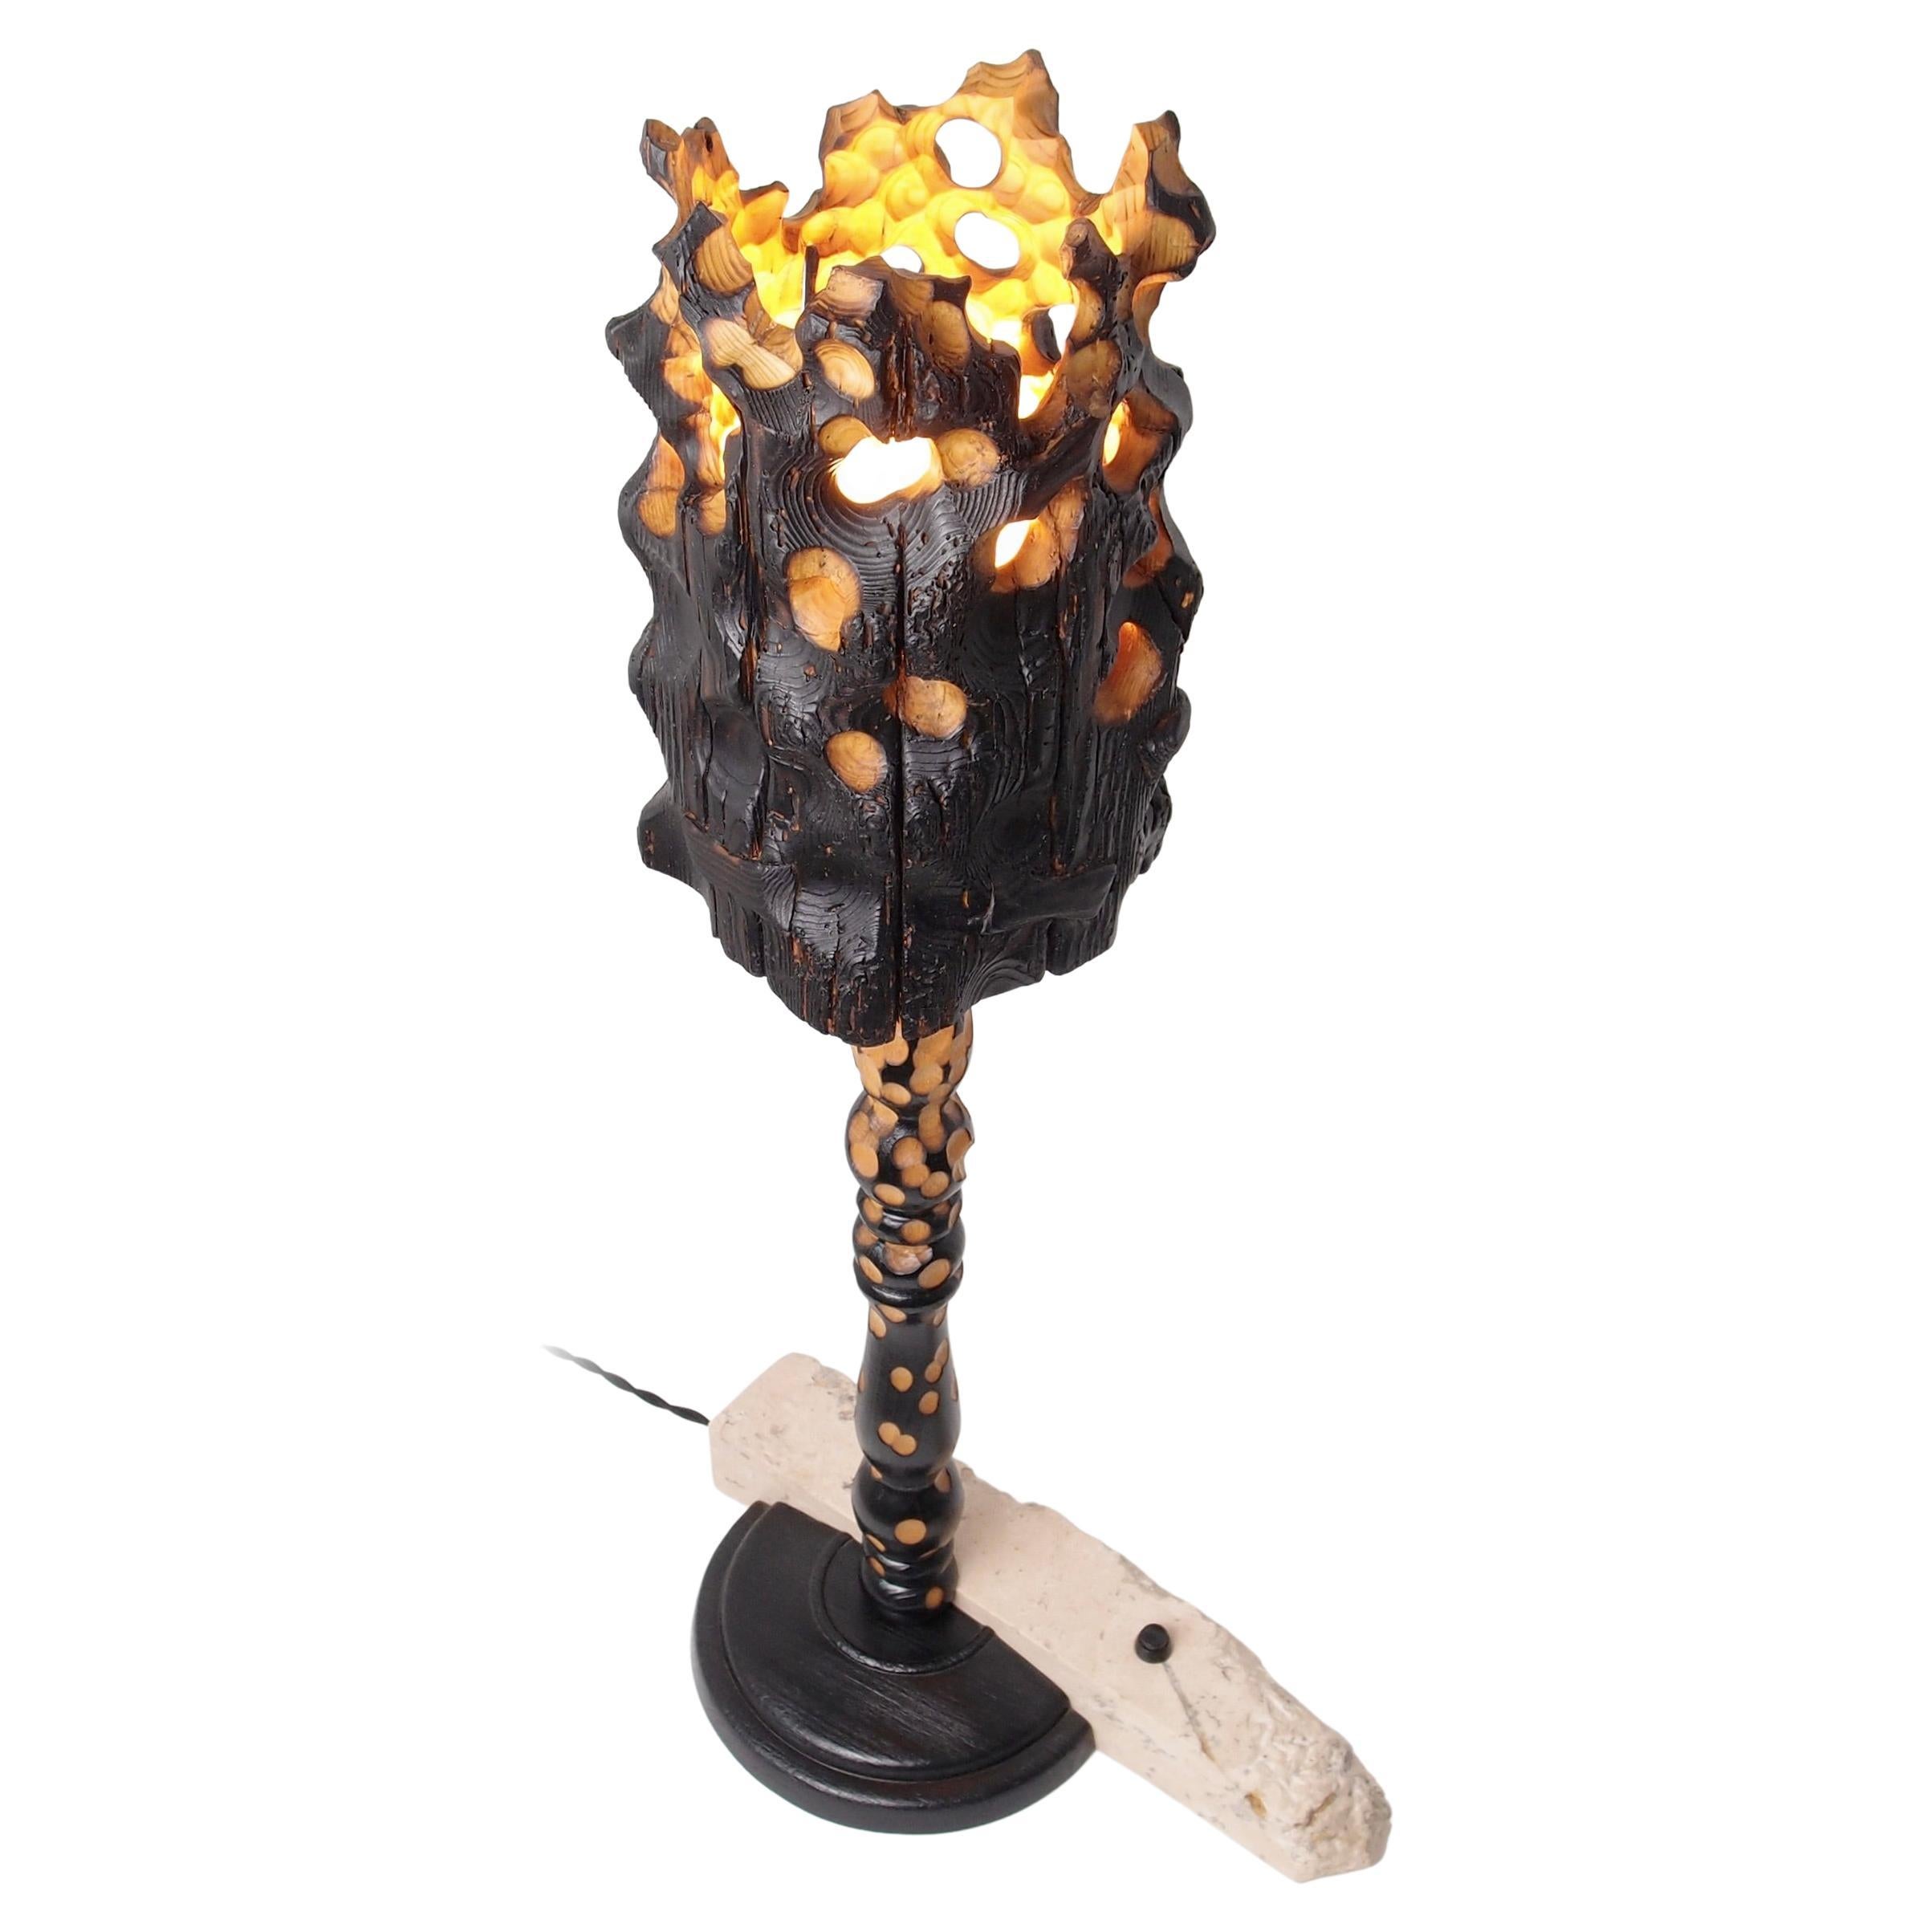 Torch, Sculptured Lighting, Table Lamp from Reclaimed Burned Wood and Stone For Sale